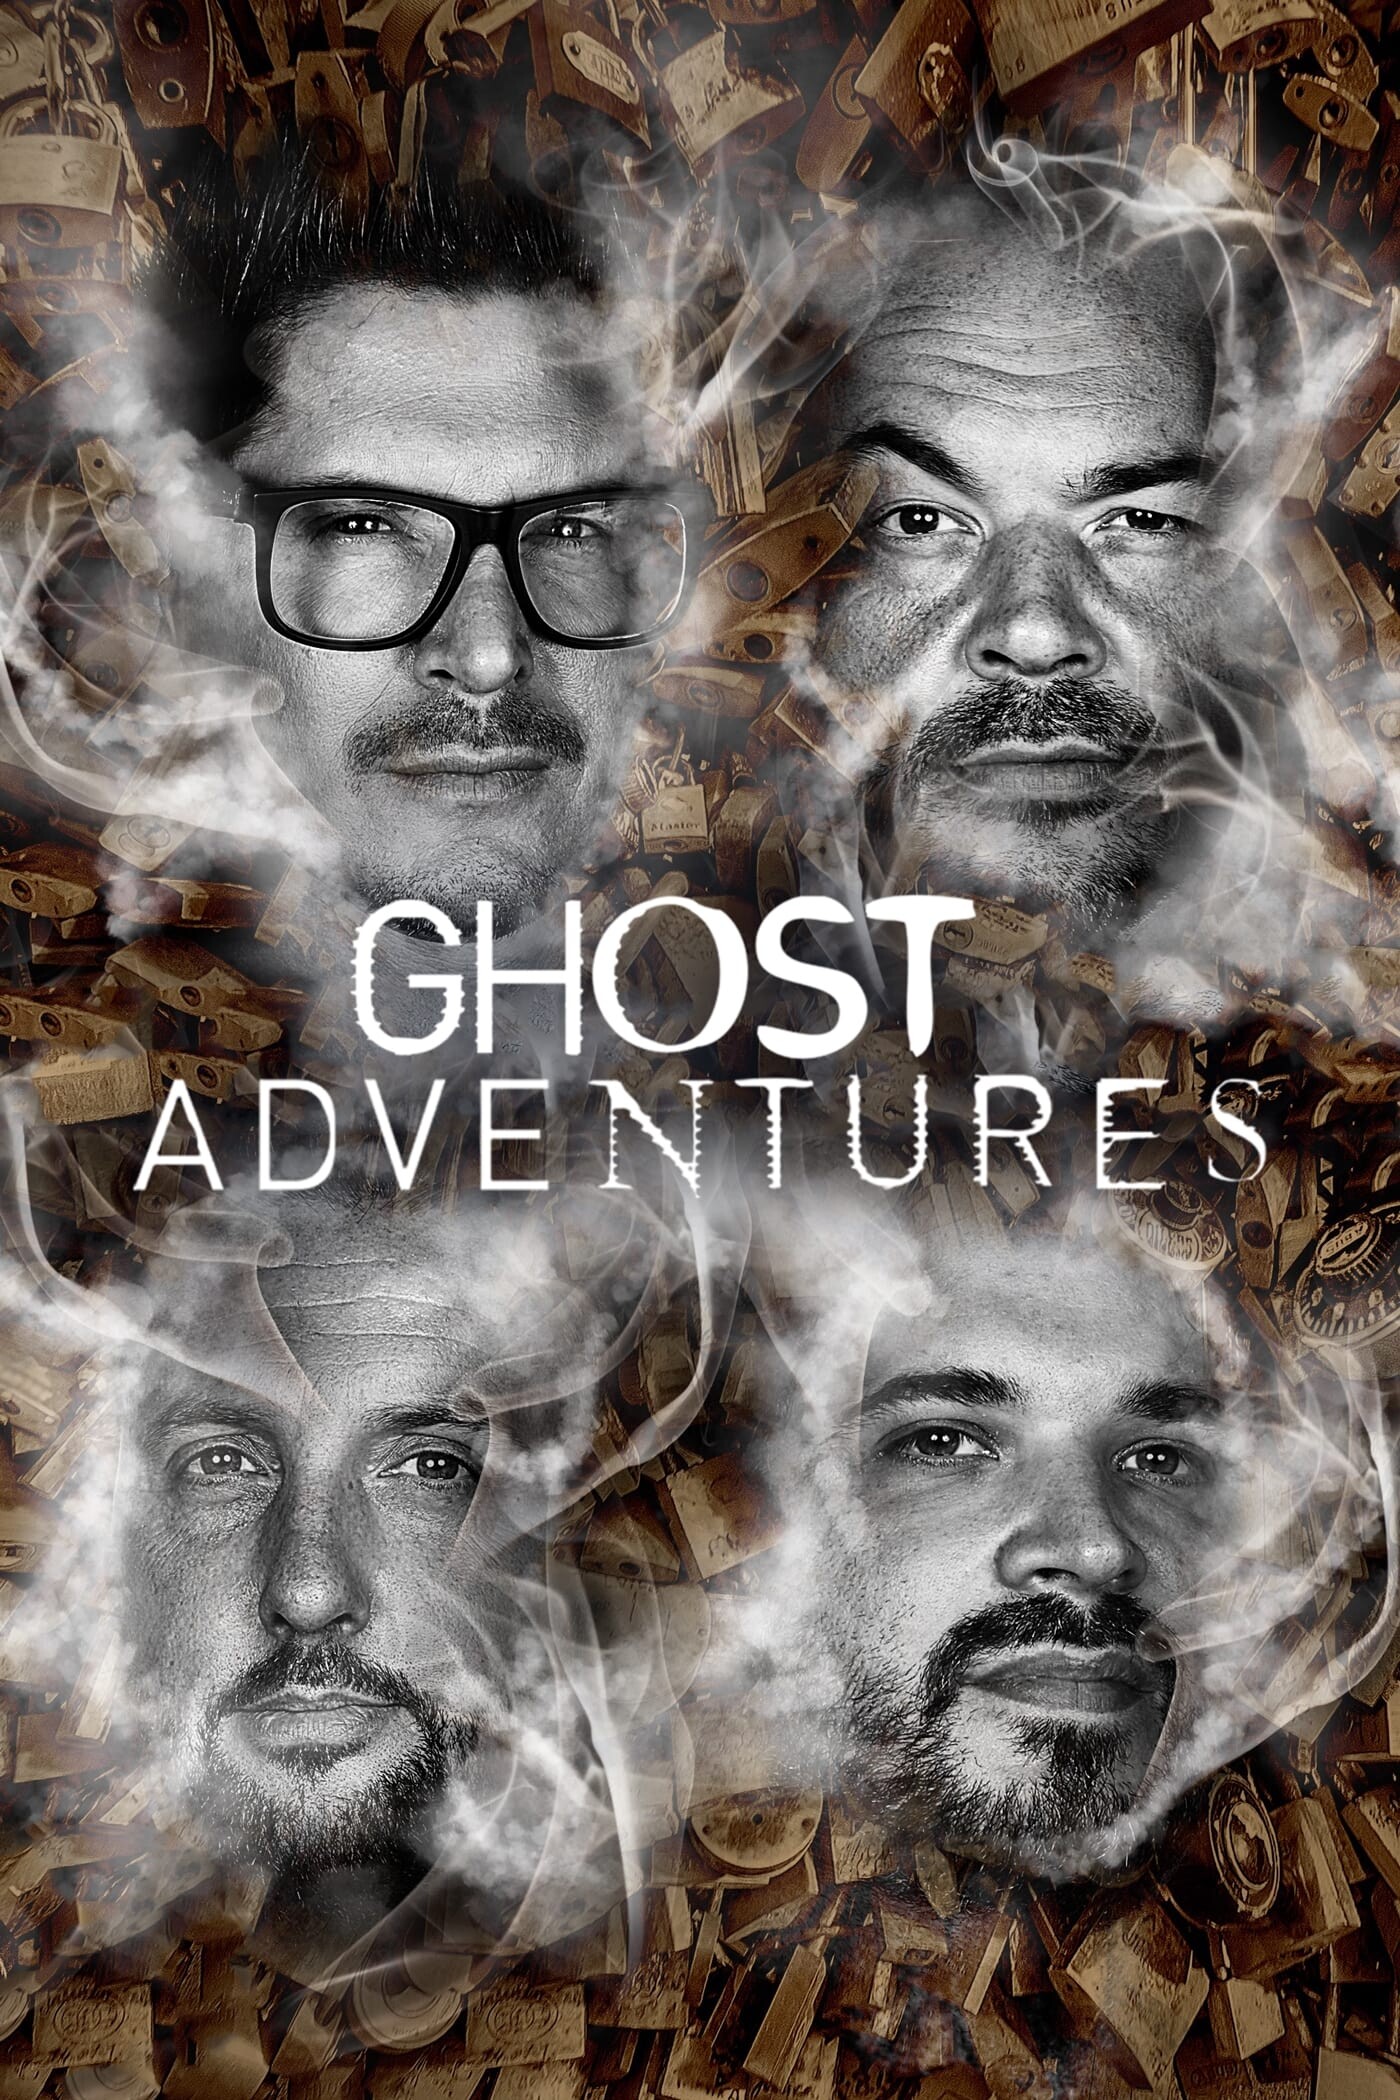 Ghost Adventures (TV Series): Team members of a popular paranormal activity researching show, Travel Channel, Zak Bagans. 1400x2100 HD Wallpaper.